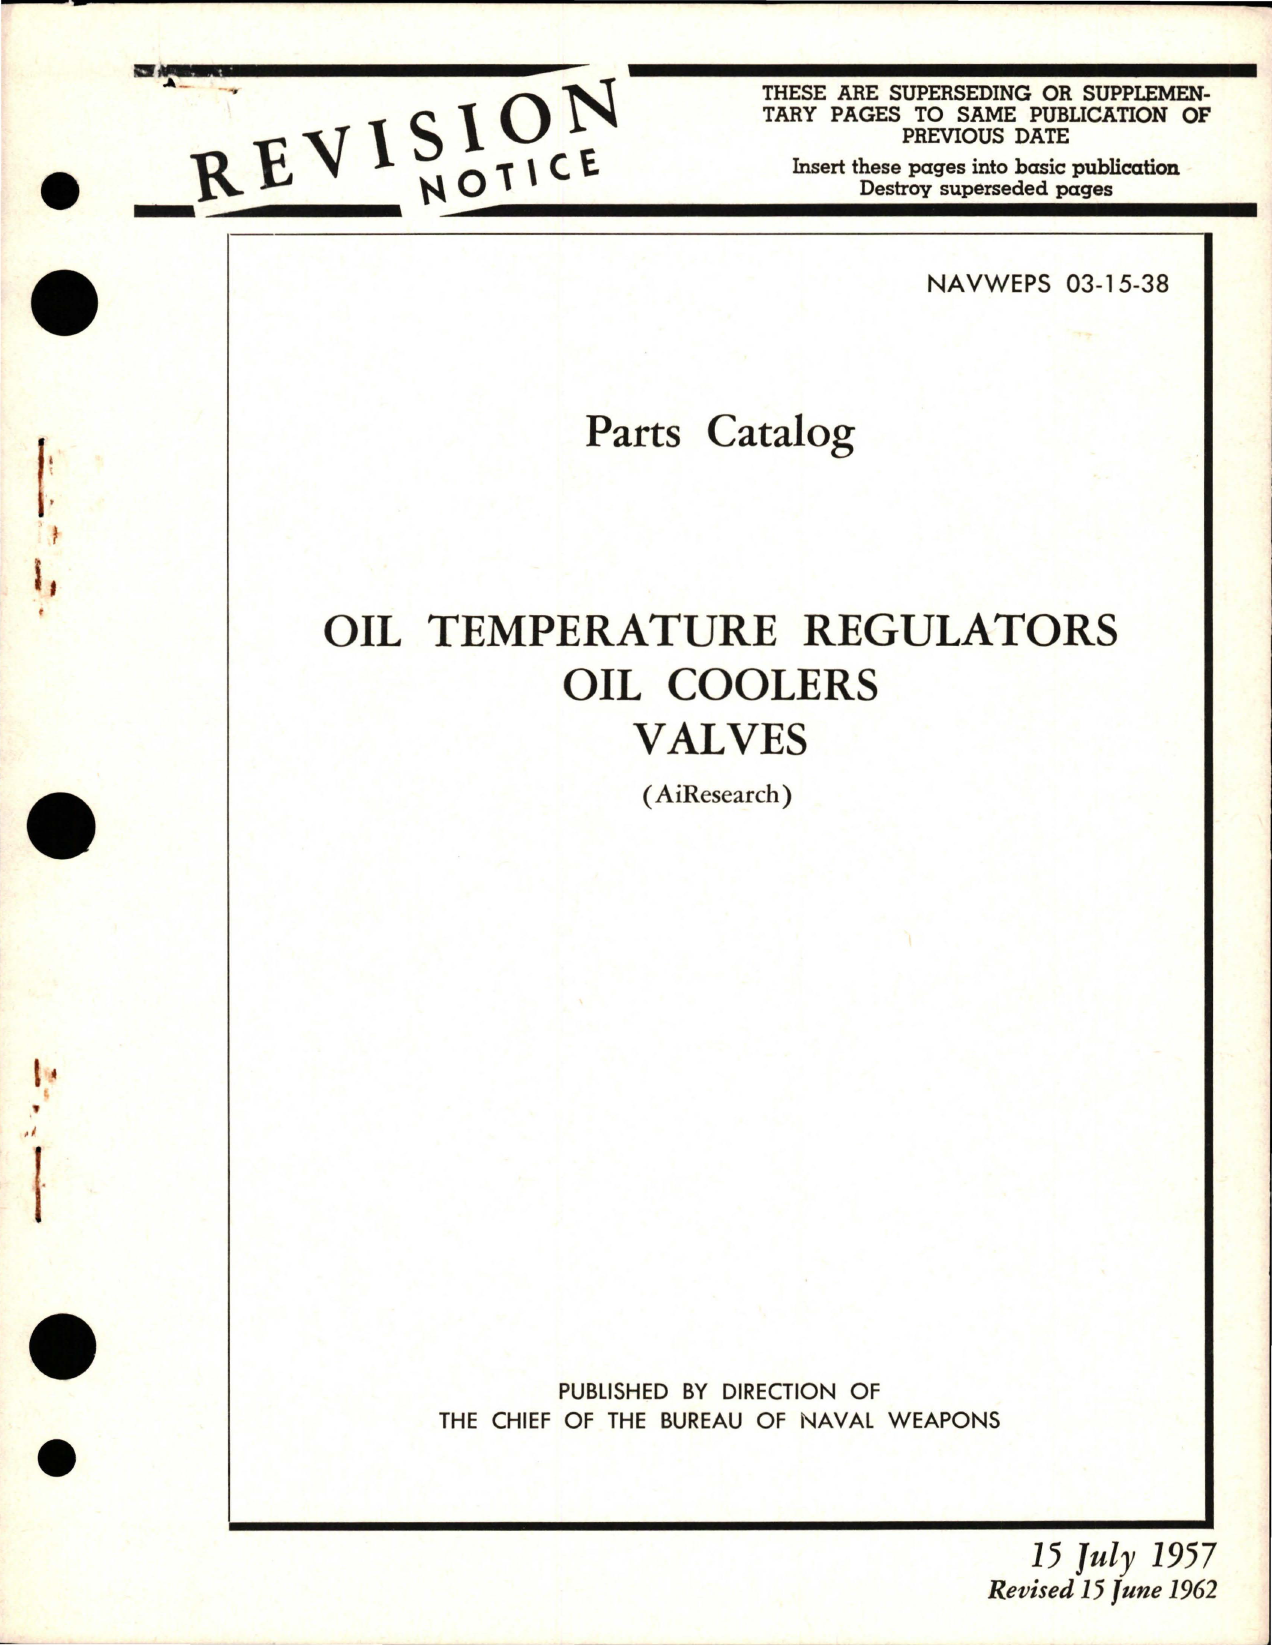 Sample page 1 from AirCorps Library document: Parts Catalog for Oil Temperature Regulators, Oil Coolers Valves